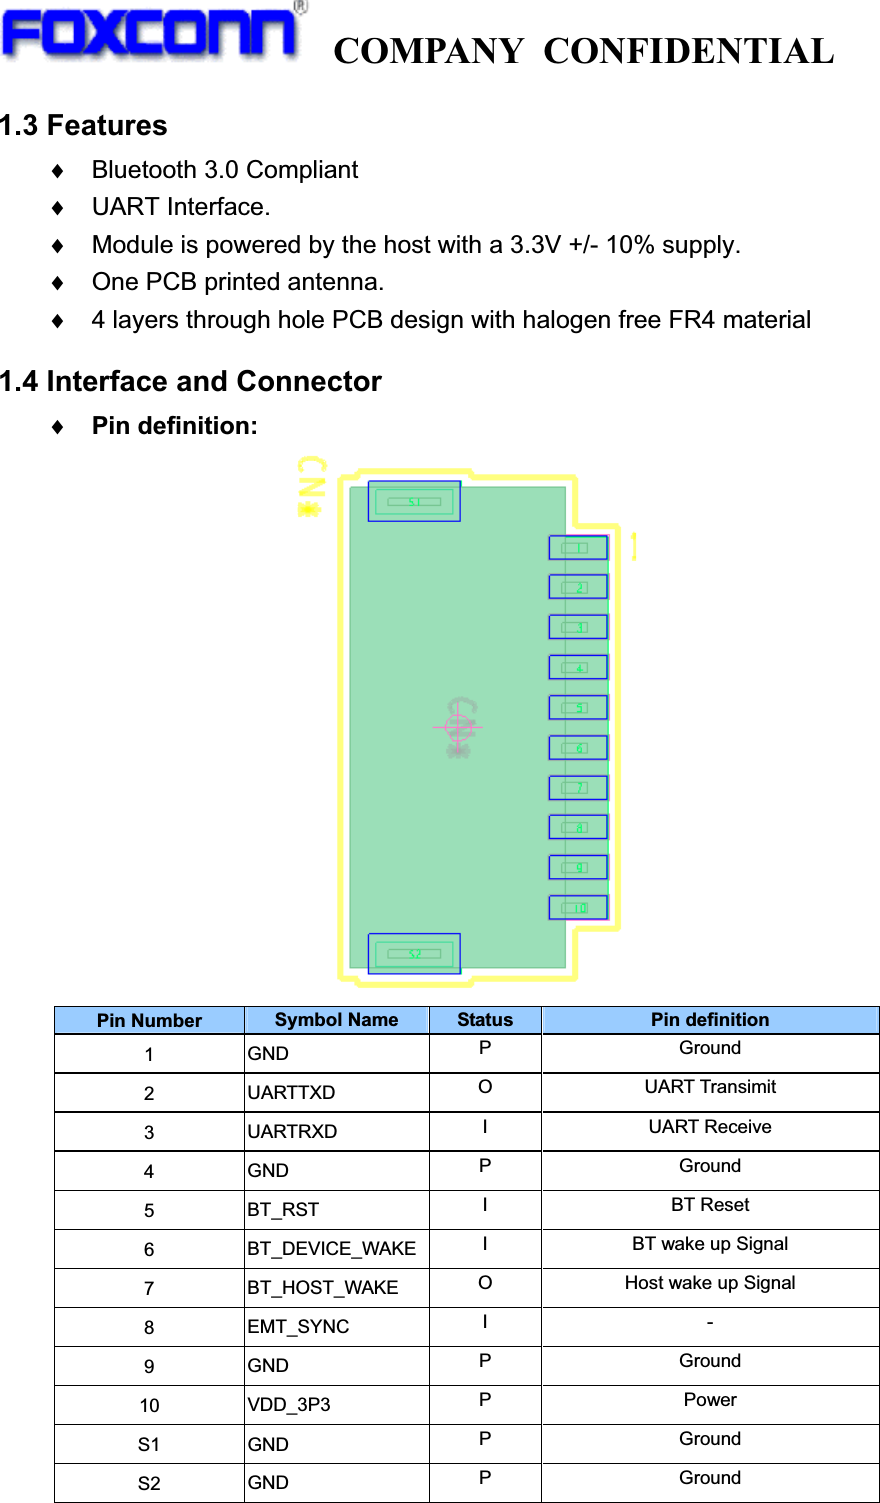   COMPANY CONFIDENTIAL             1.3 Features i  Bluetooth 3.0 Compliant i UART Interface. i  Module is powered by the host with a 3.3V +/- 10% supply. i  One PCB printed antenna.   i  4 layers through hole PCB design with halogen free FR4 material 1.4 Interface and Connector iPin definition:   Pin Number  Symbol Name  Status  Pin definition 1GND P Ground 2UARTTXD  O UART Transimit 3UARTRXD  I UART Receive 4GND P Ground 5BT_RST  I BT Reset 6BT_DEVICE_WAKE I  BT wake up Signal 7BT_HOST_WAKE  O  Host wake up Signal 8EMT_SYNC  I - 9GND P Ground 10 VDD_3P3  P Power S1 GND P Ground S2 GND P Ground 